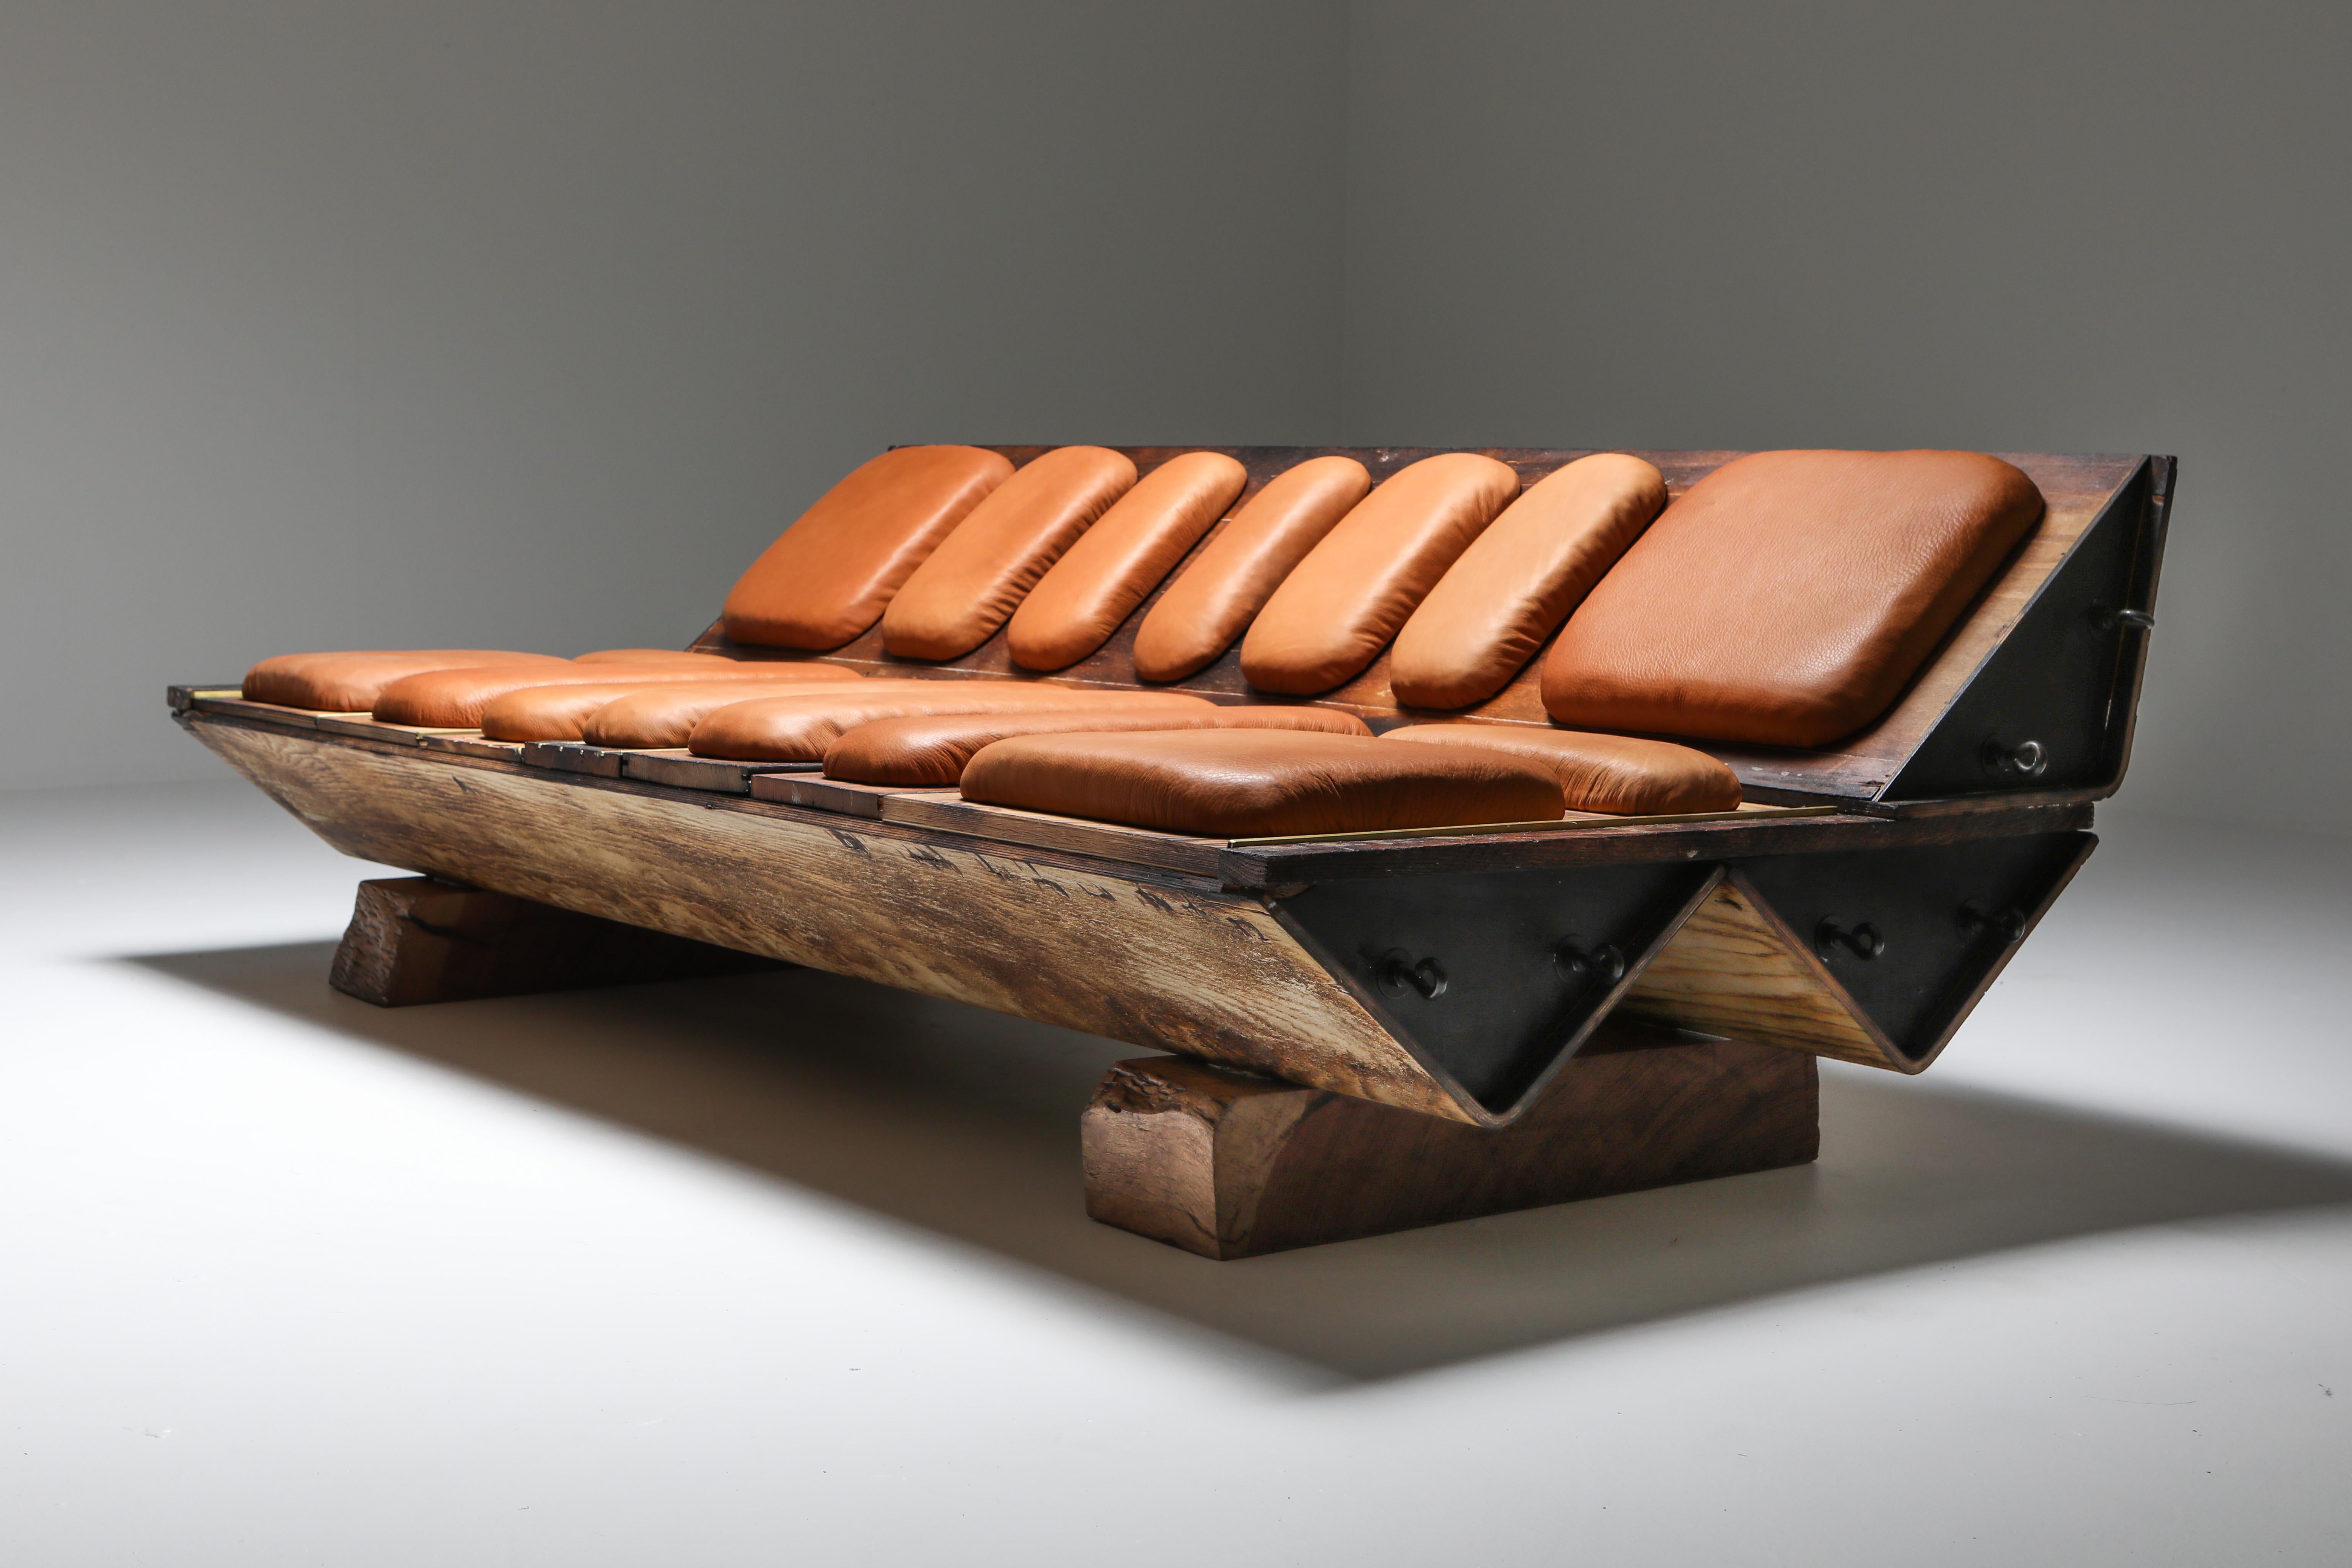 'I Studebaker' Assemblage Bench with Wooden and Leather Elements, Lionel Jadot For Sale 1